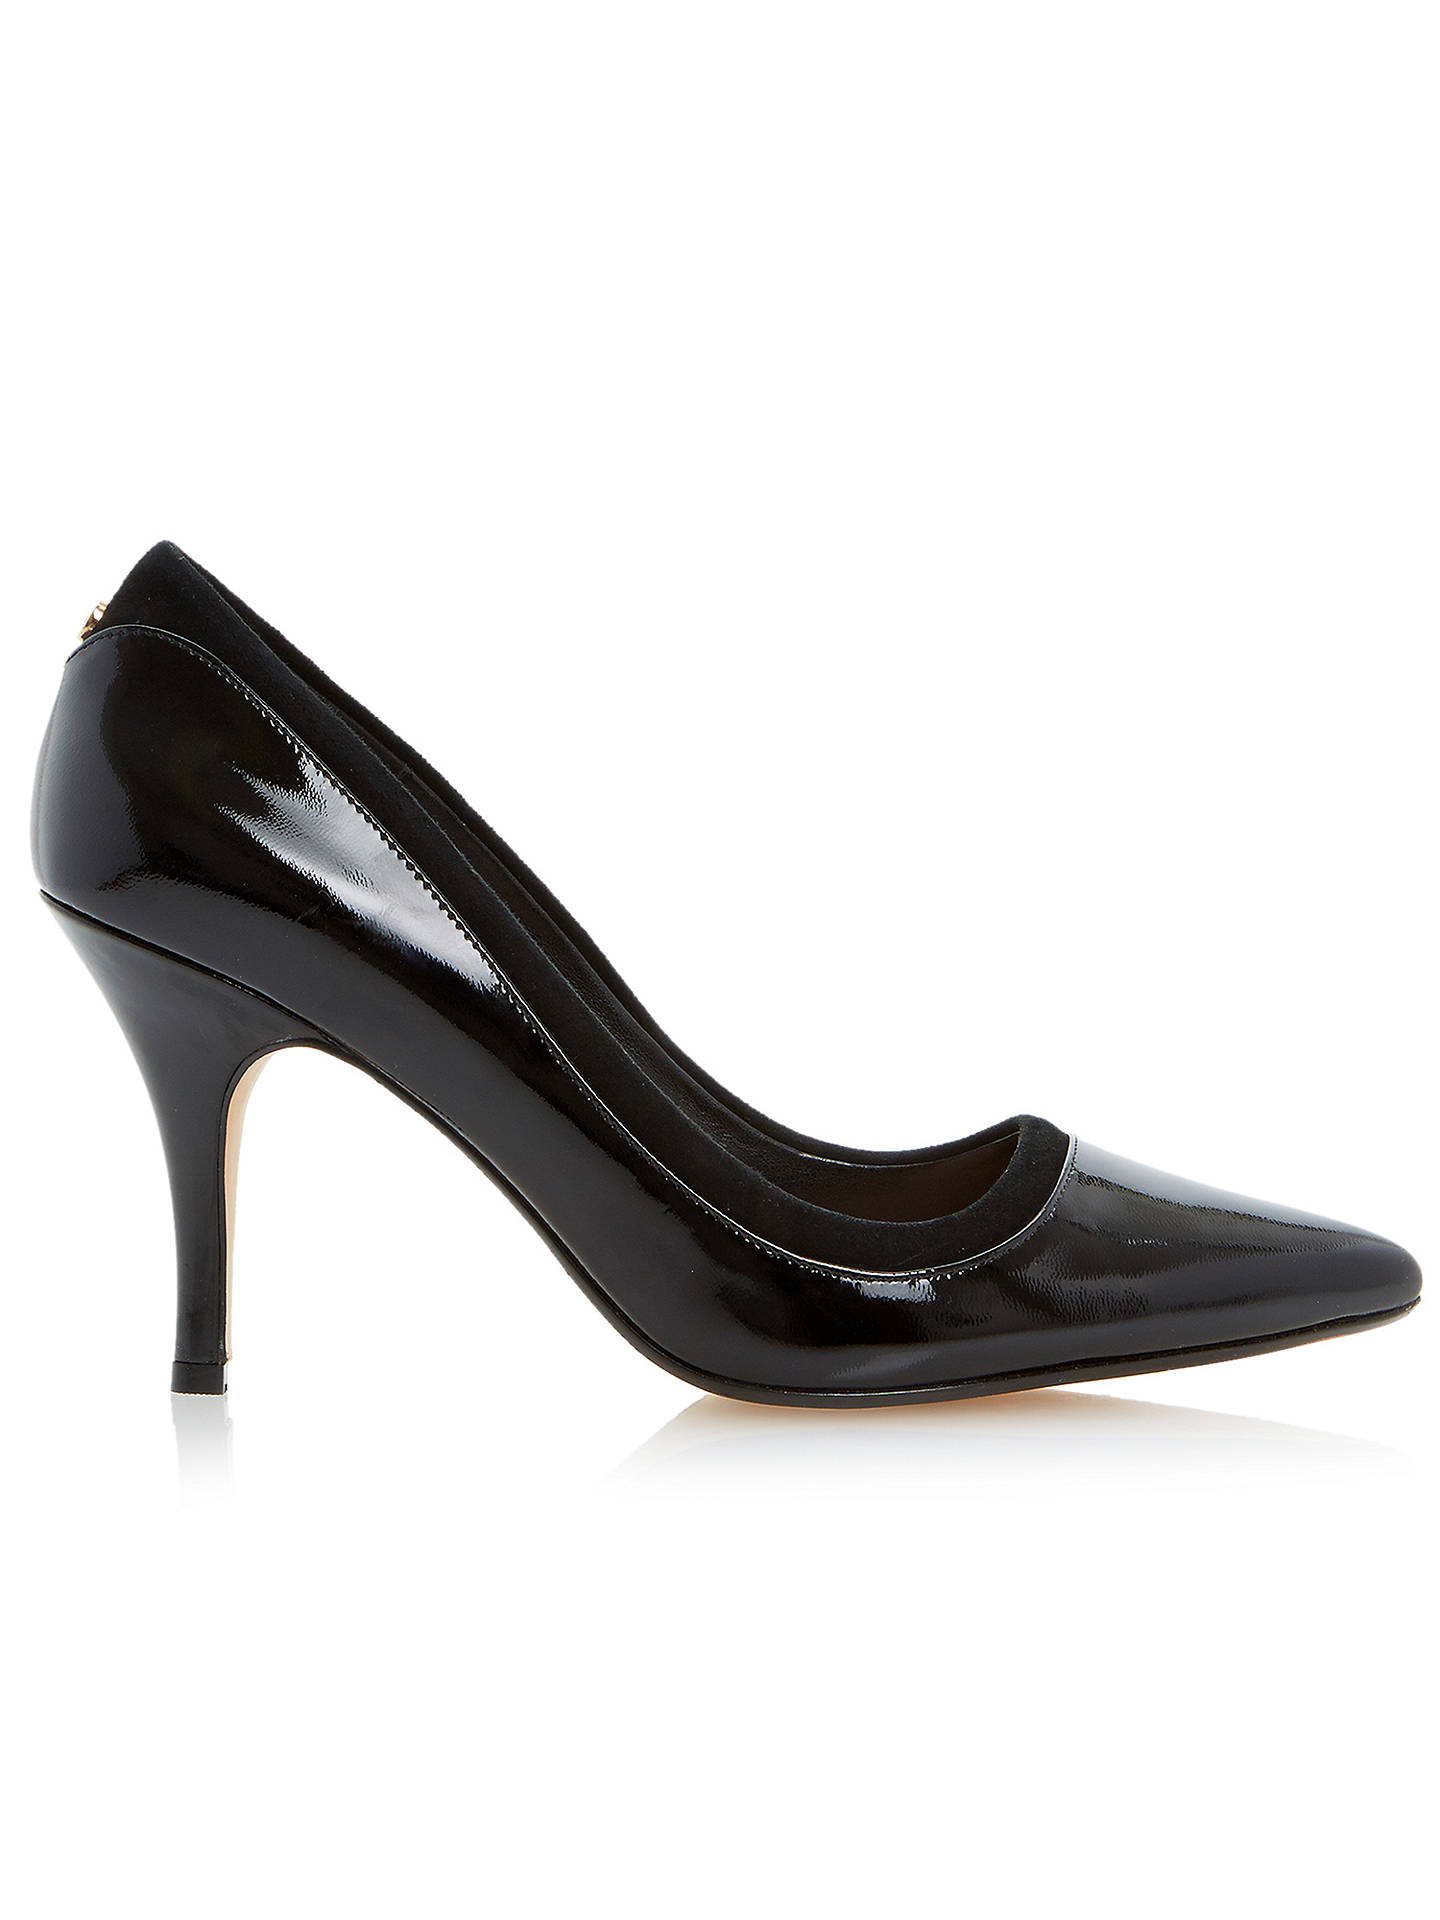 Dune Alivio Pointed Toe Patent Court Shoes, Black at John Lewis & Partners